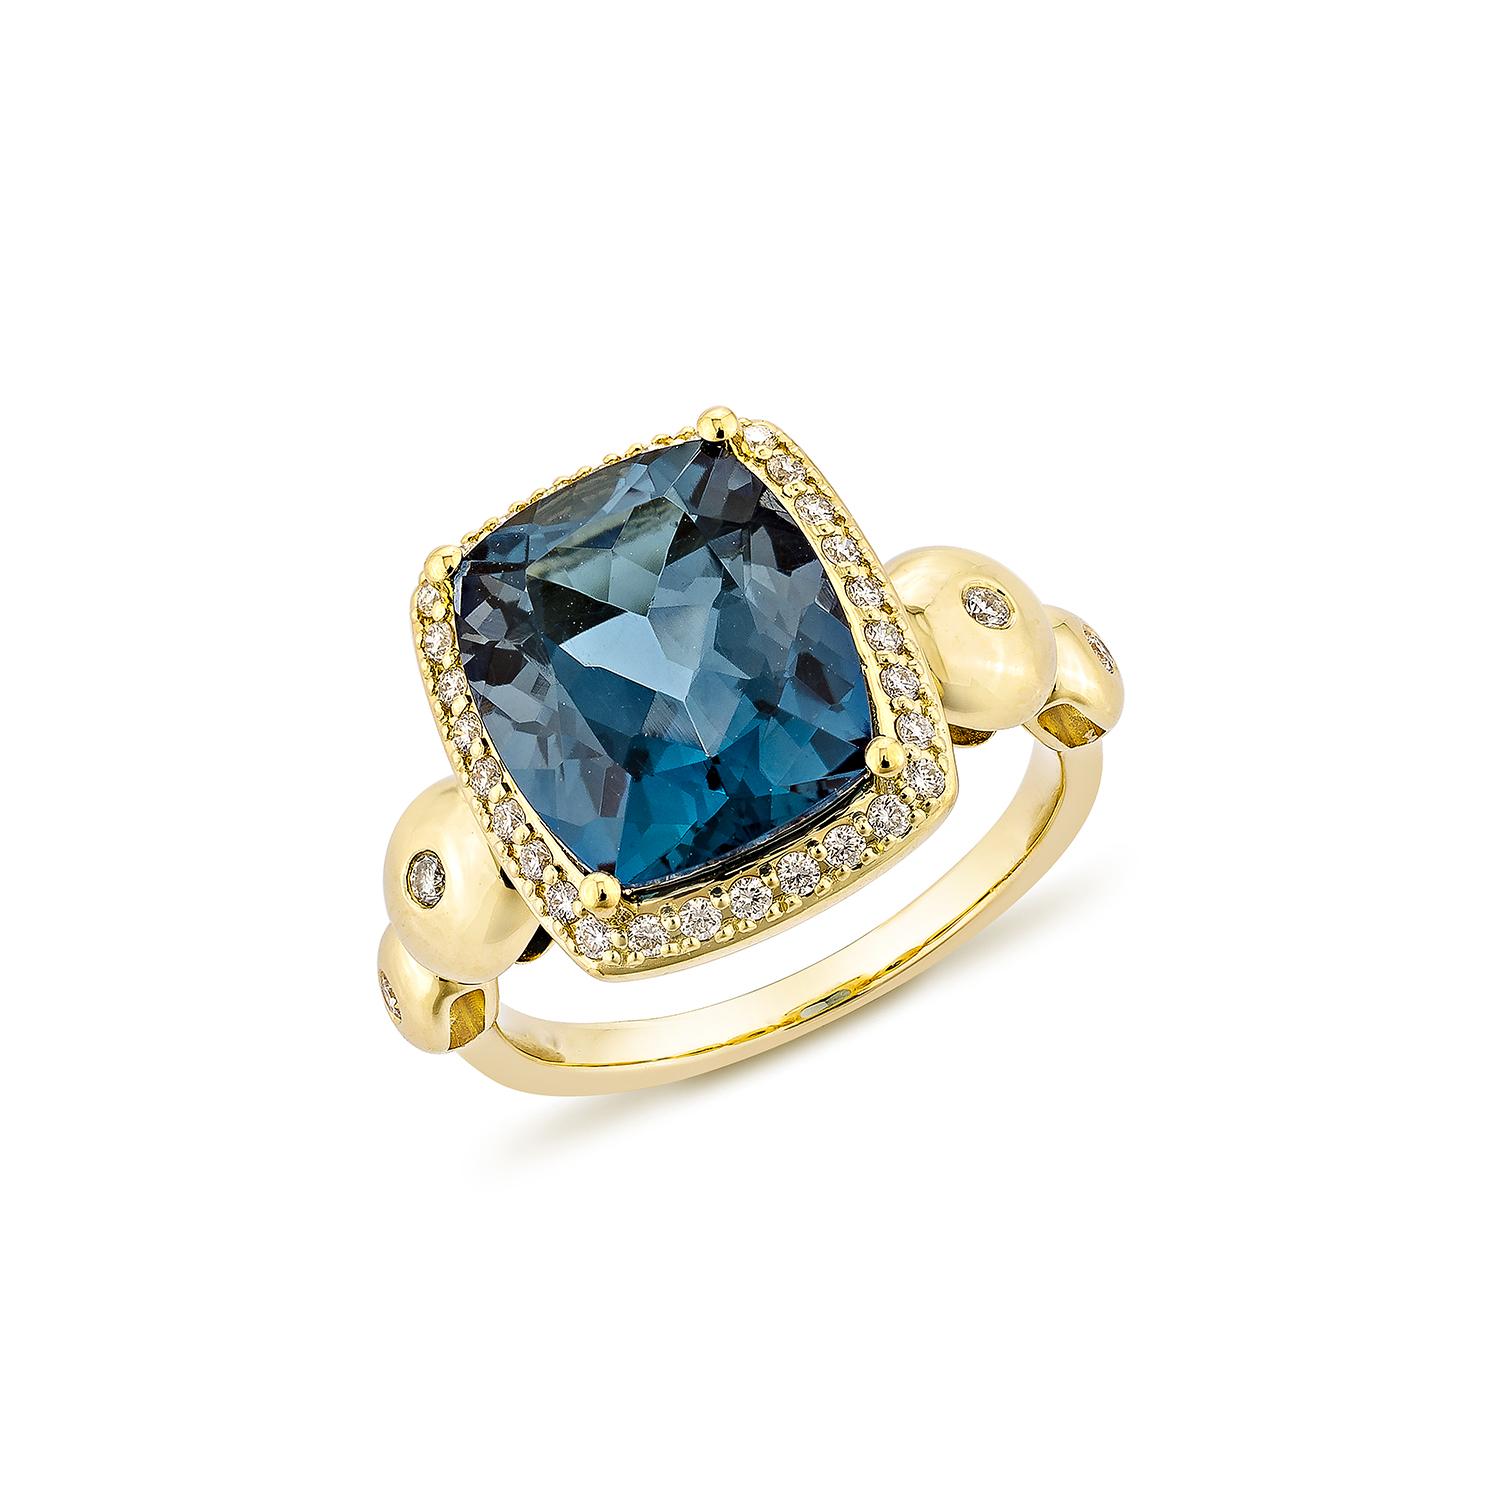 Contemporary 5.78 Carat London Blue Topaz Fancy Ring in 18Karat Yellow Gold with Diamond. For Sale